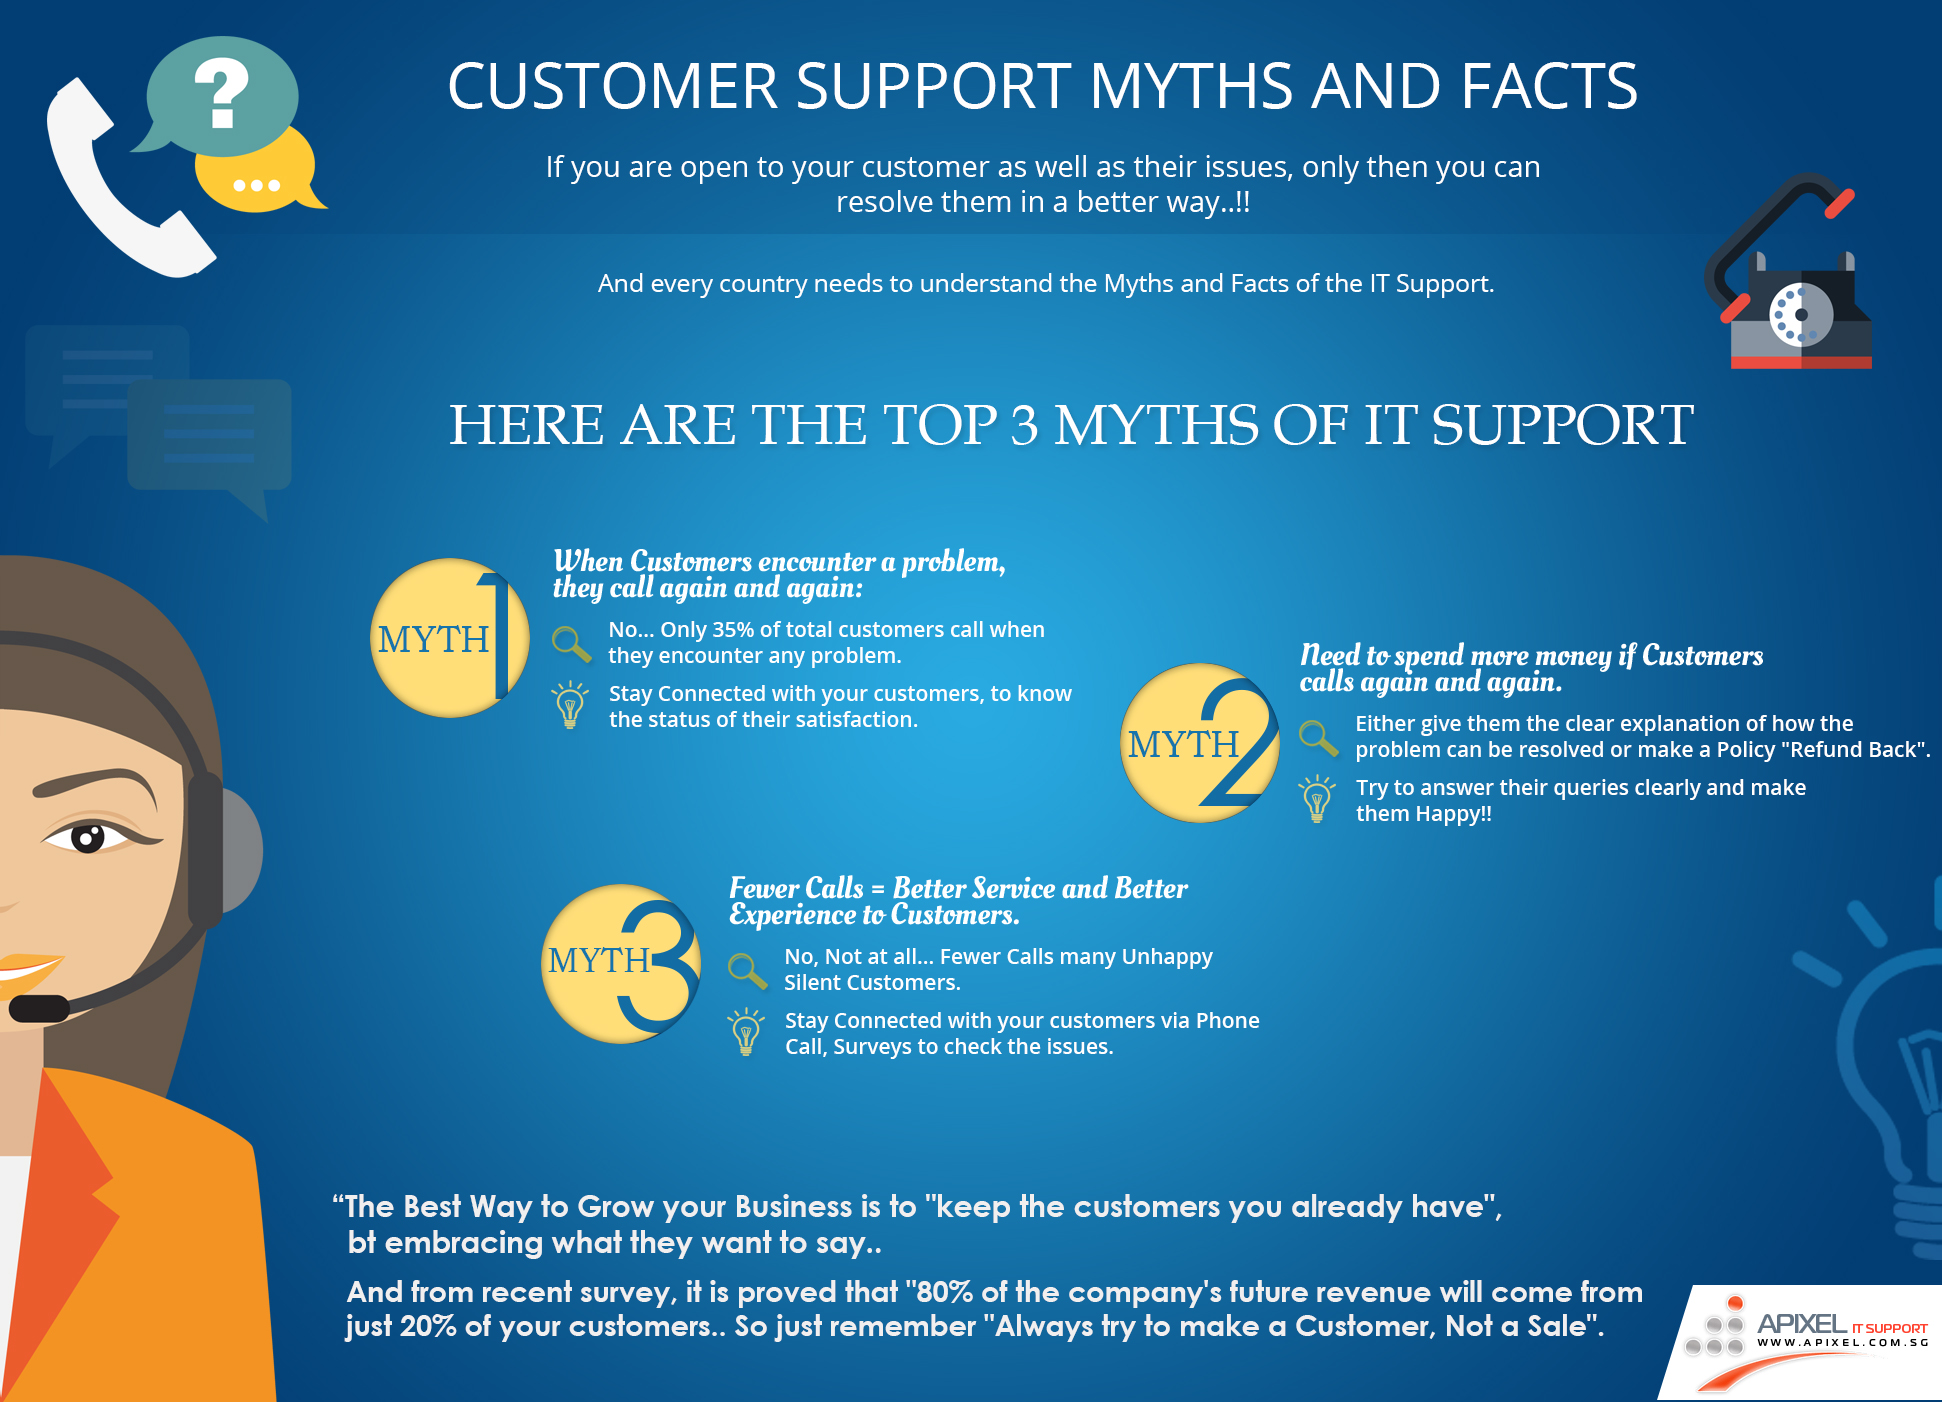 “Customer Support Myths and Facts”